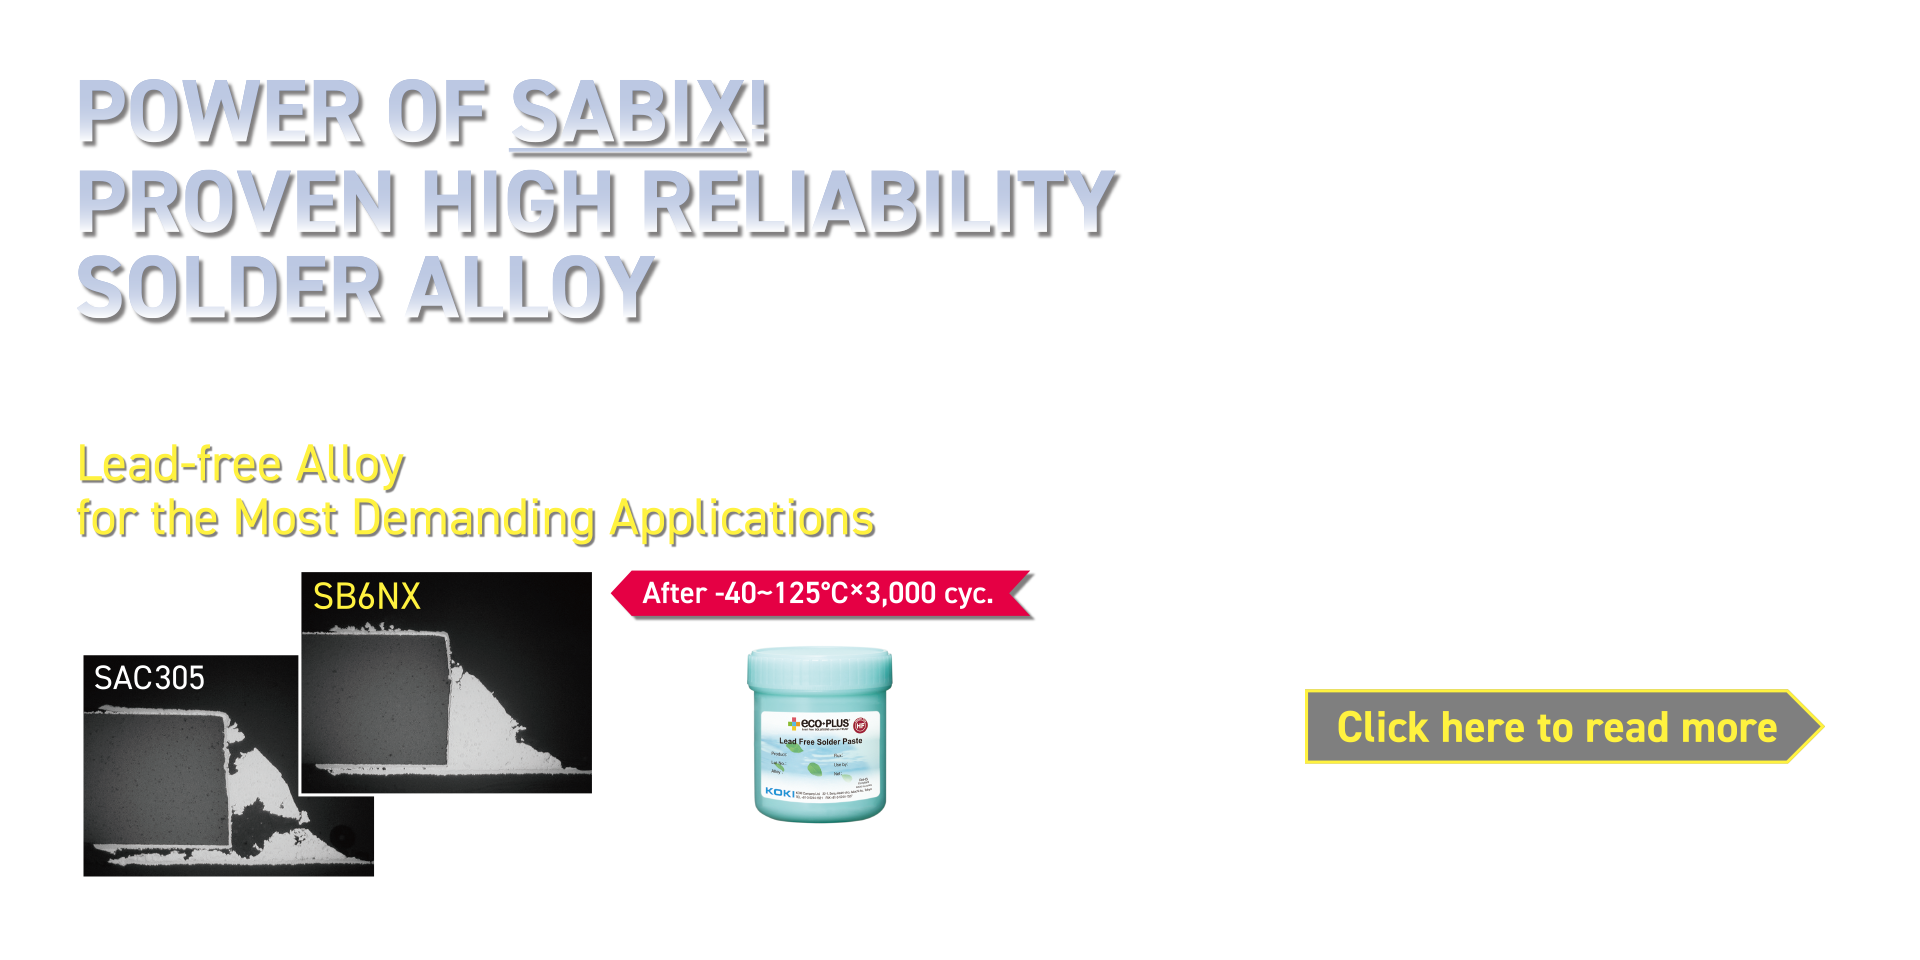 SB6NX58-HF350,In-containing high reliability alloy halogen-free solder paste recommended for ENIG finish